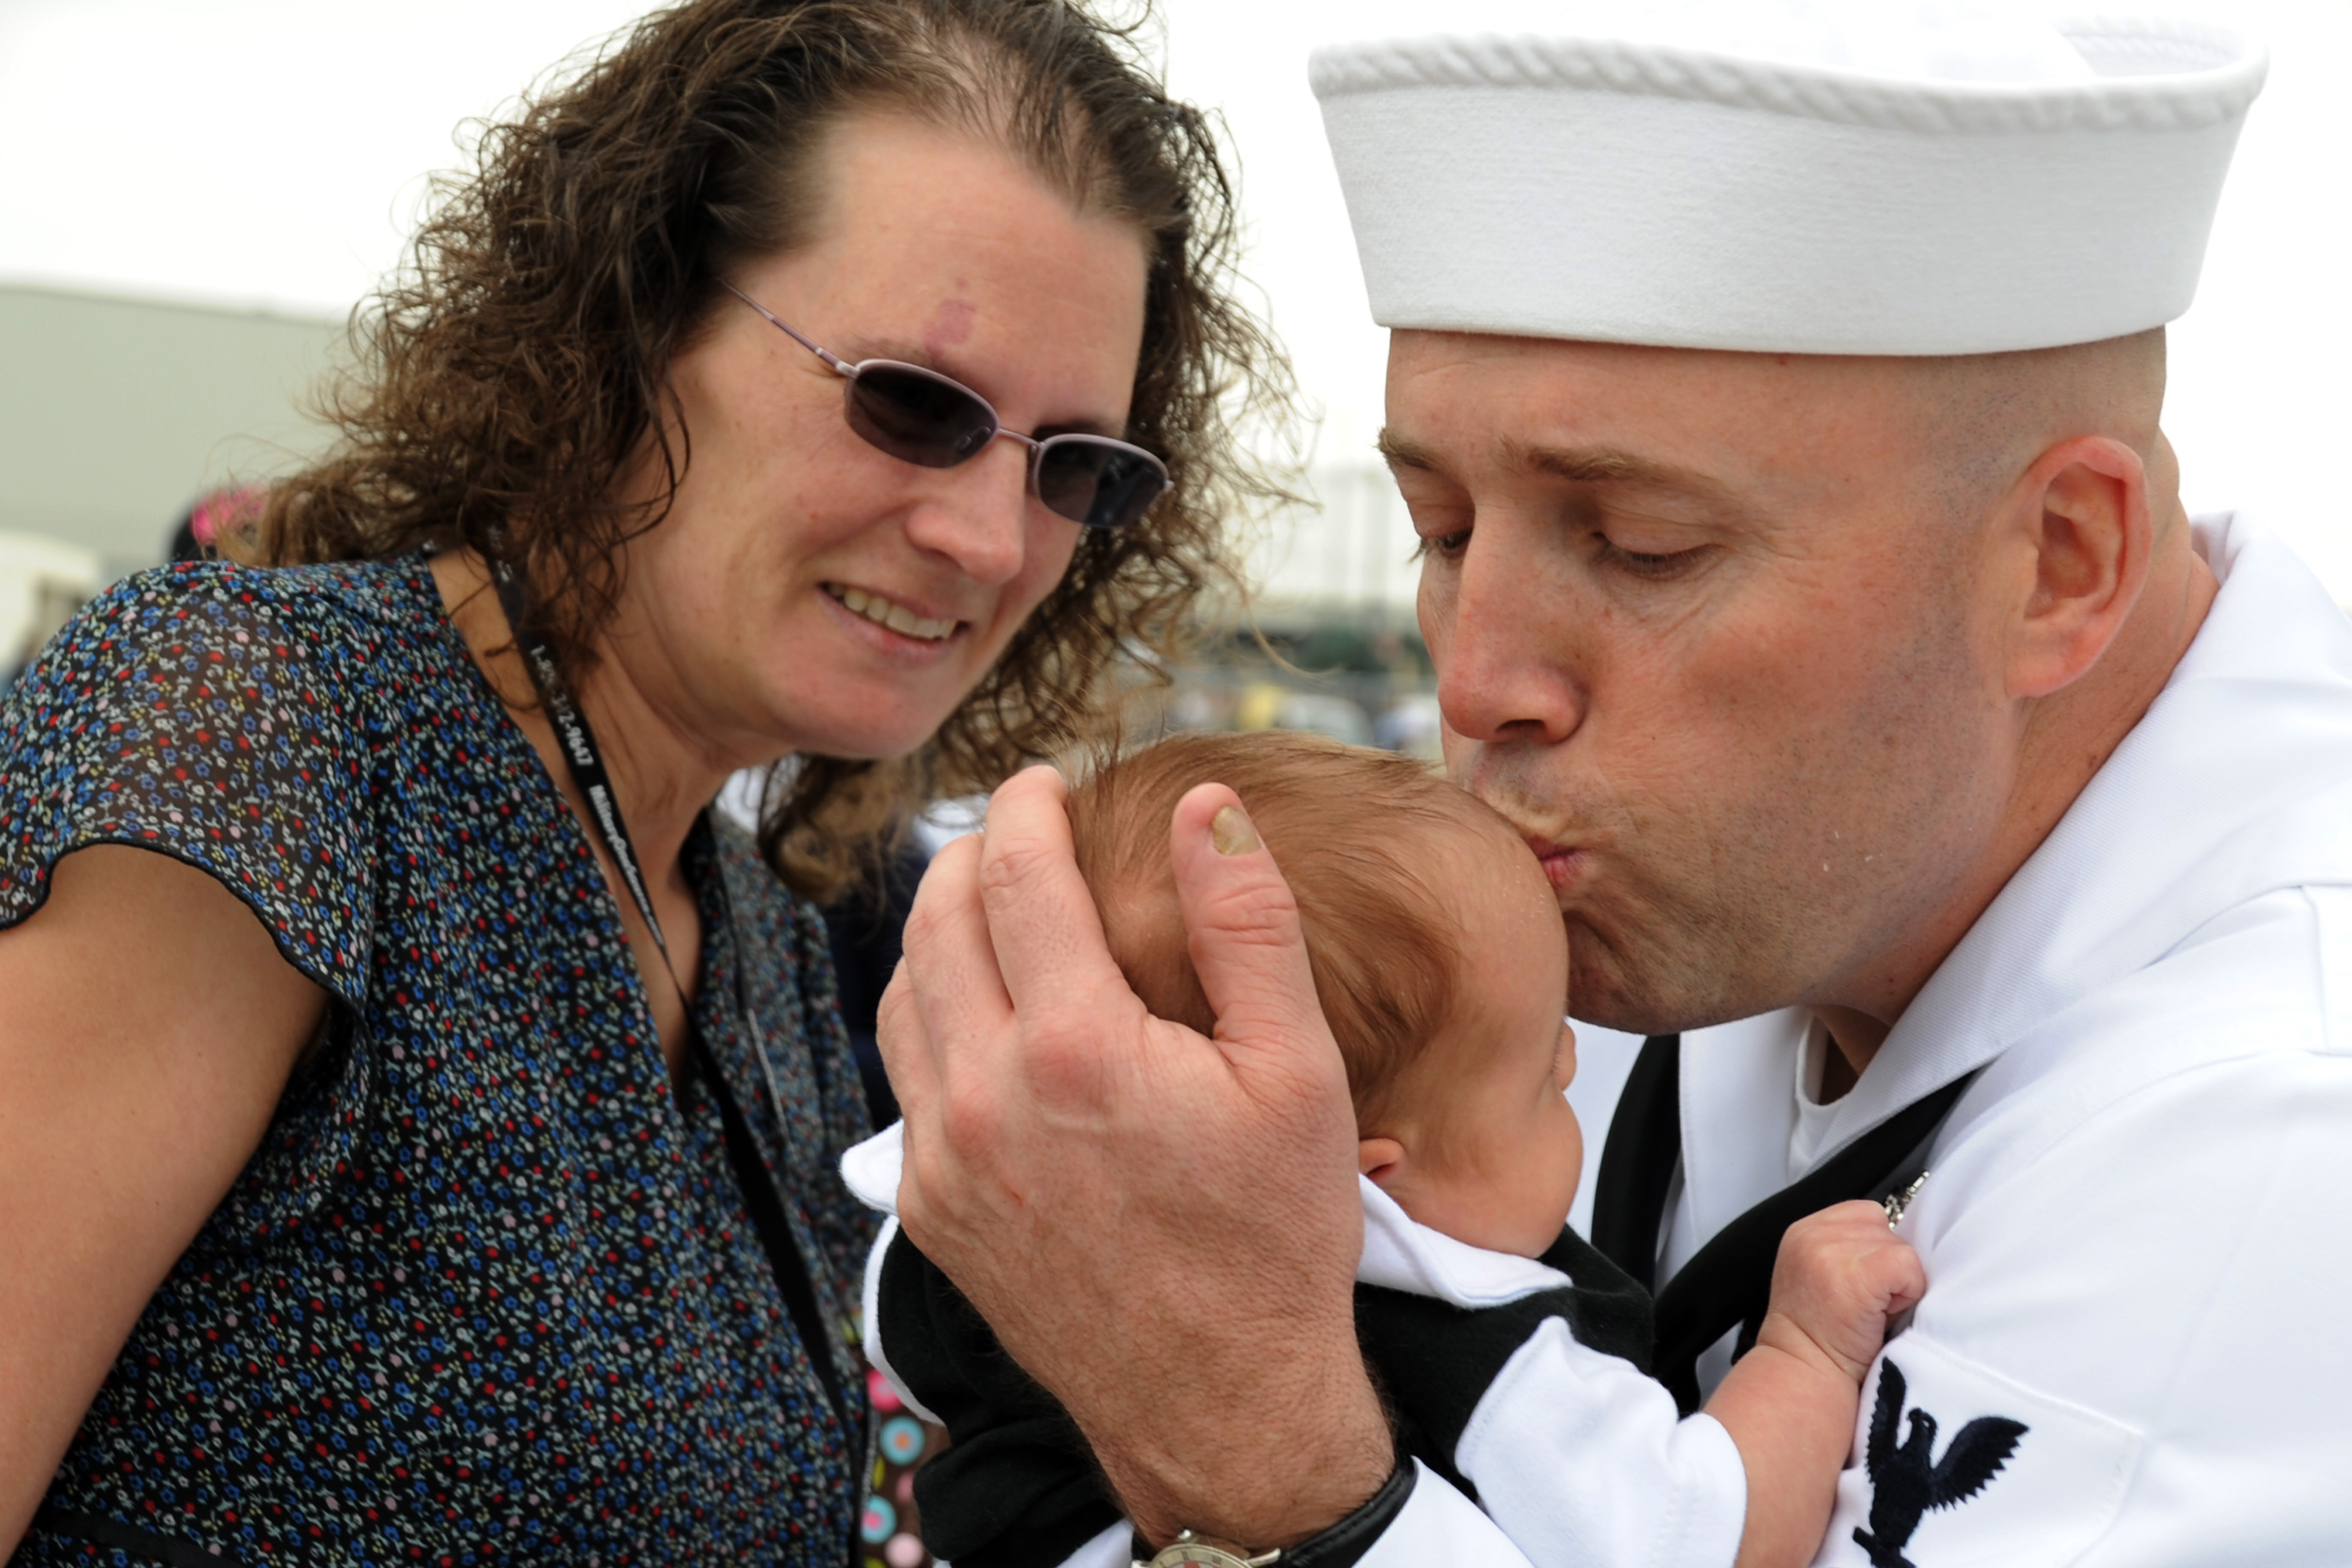 Flickr - Official U.S. Navy Imagery - A Sailor is greeted by his family. (1)